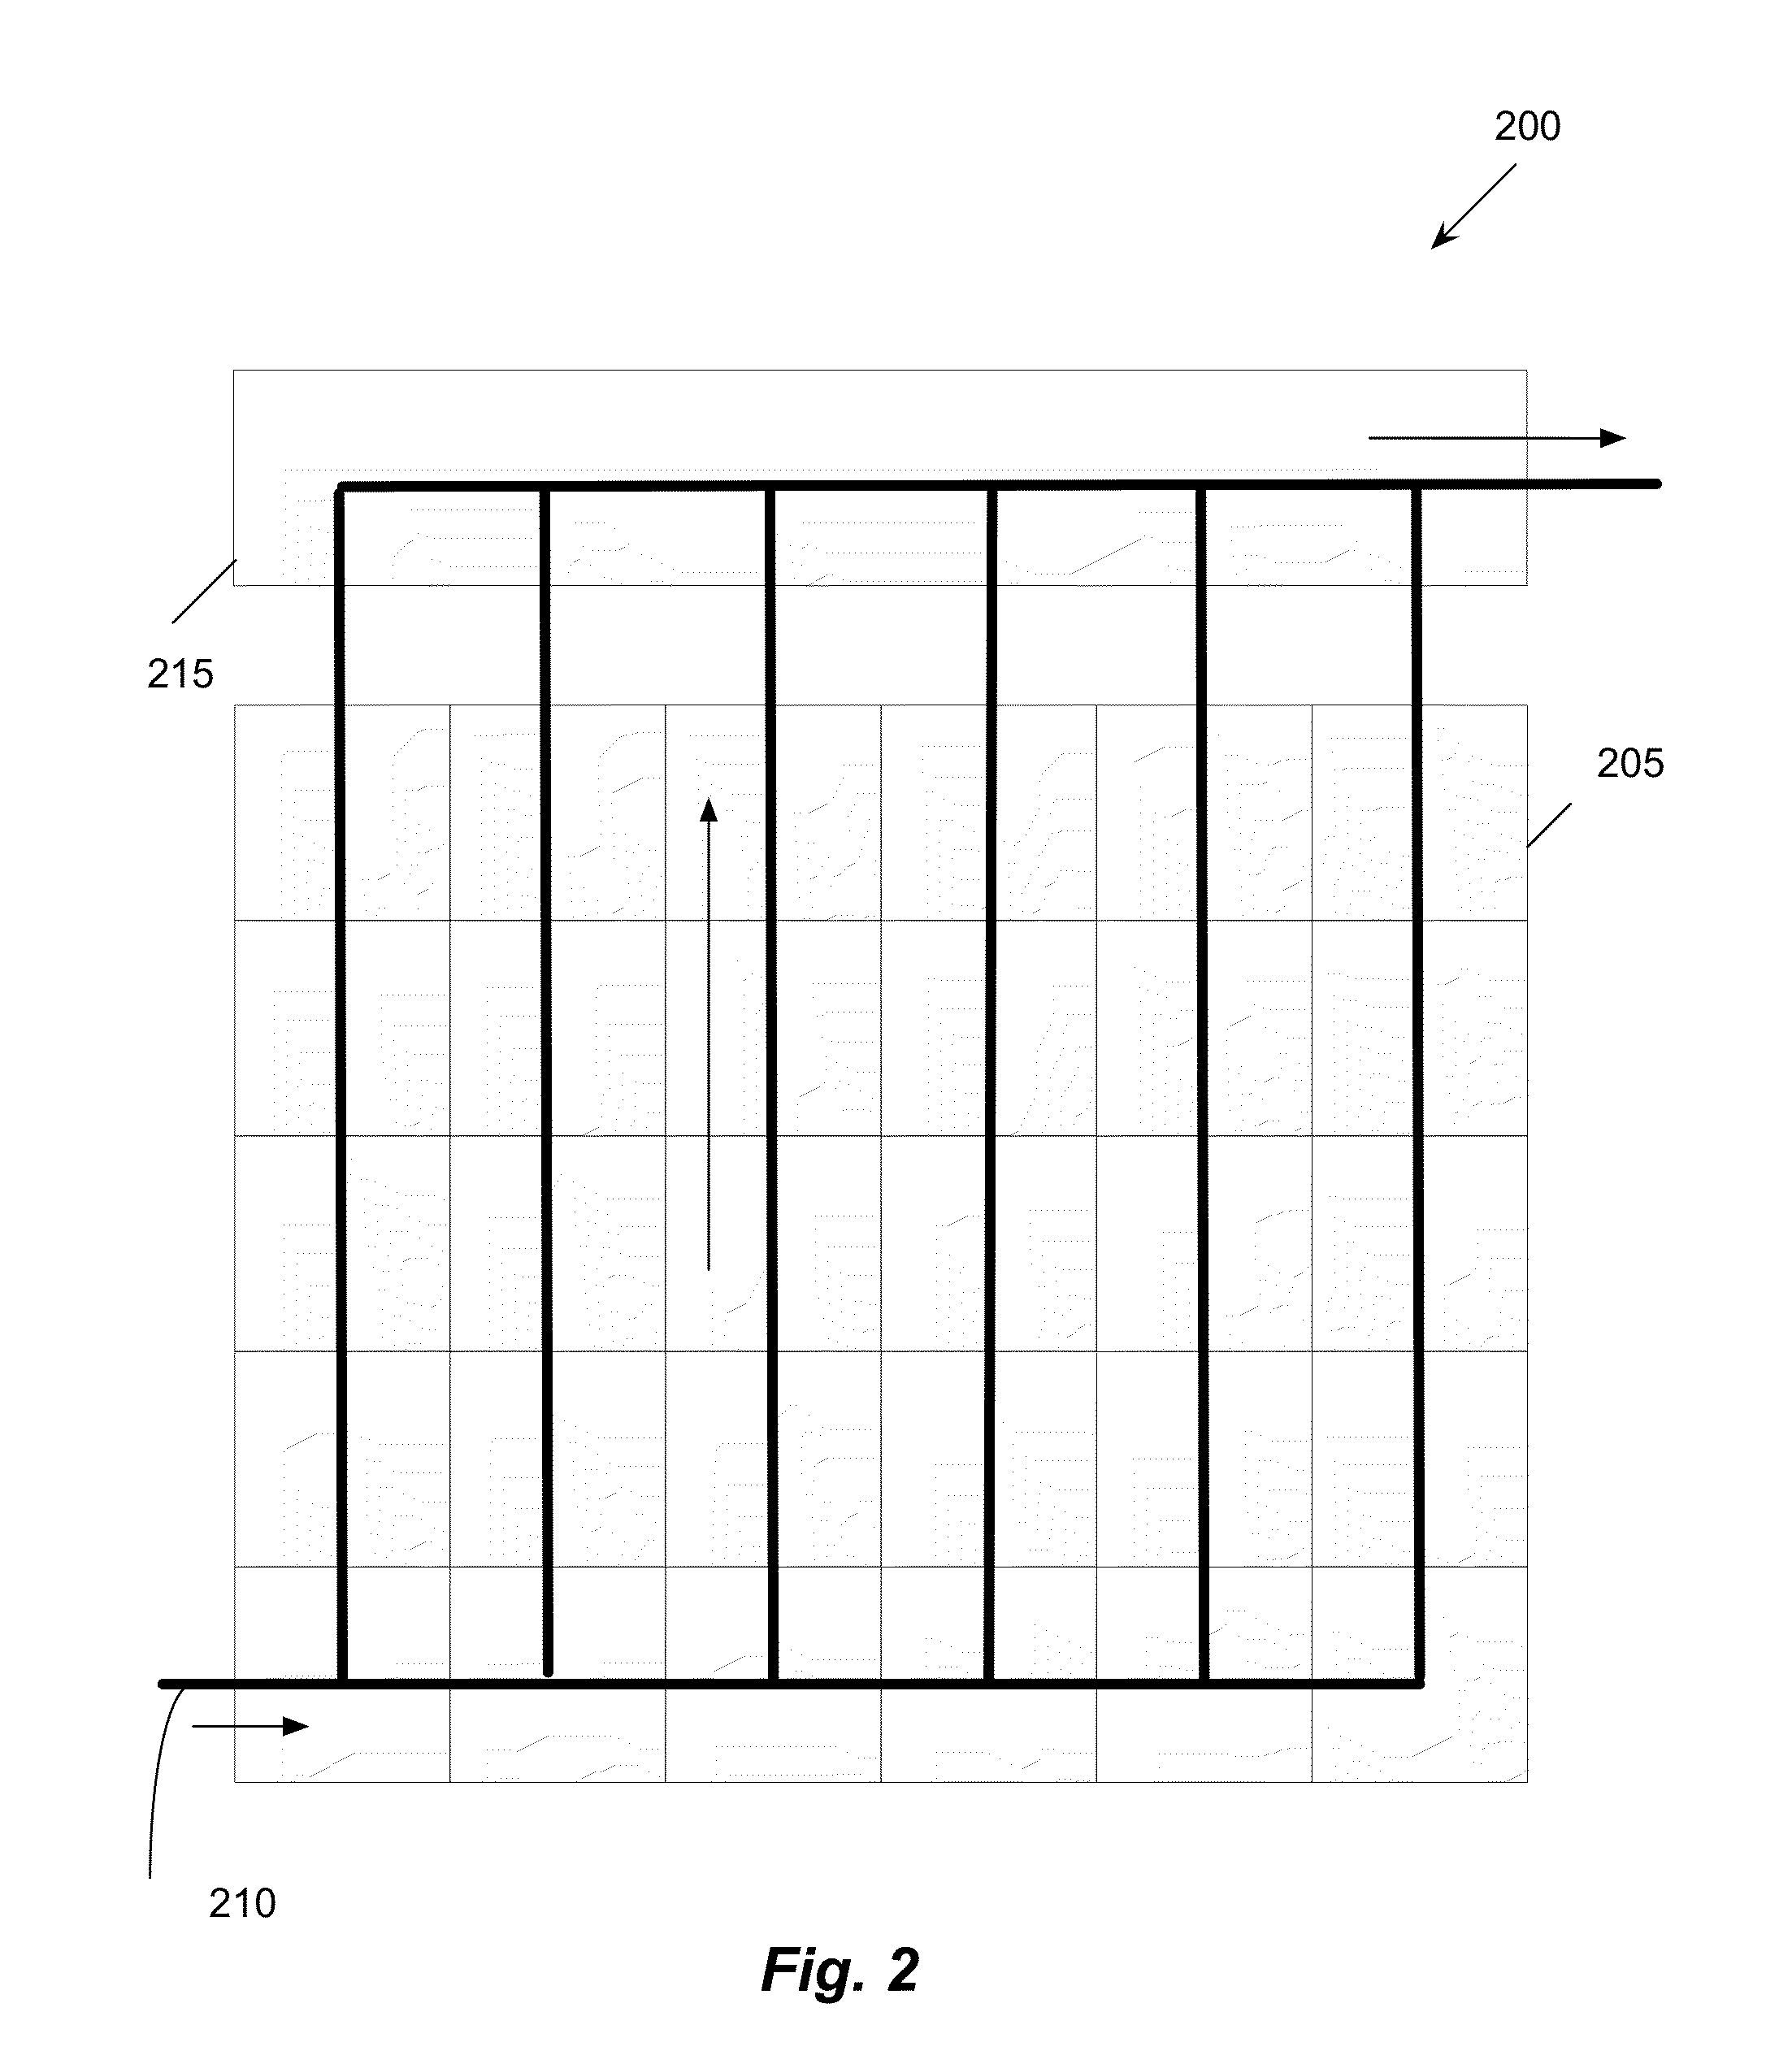 Non-intrusive monitoring and control of integrated circuits